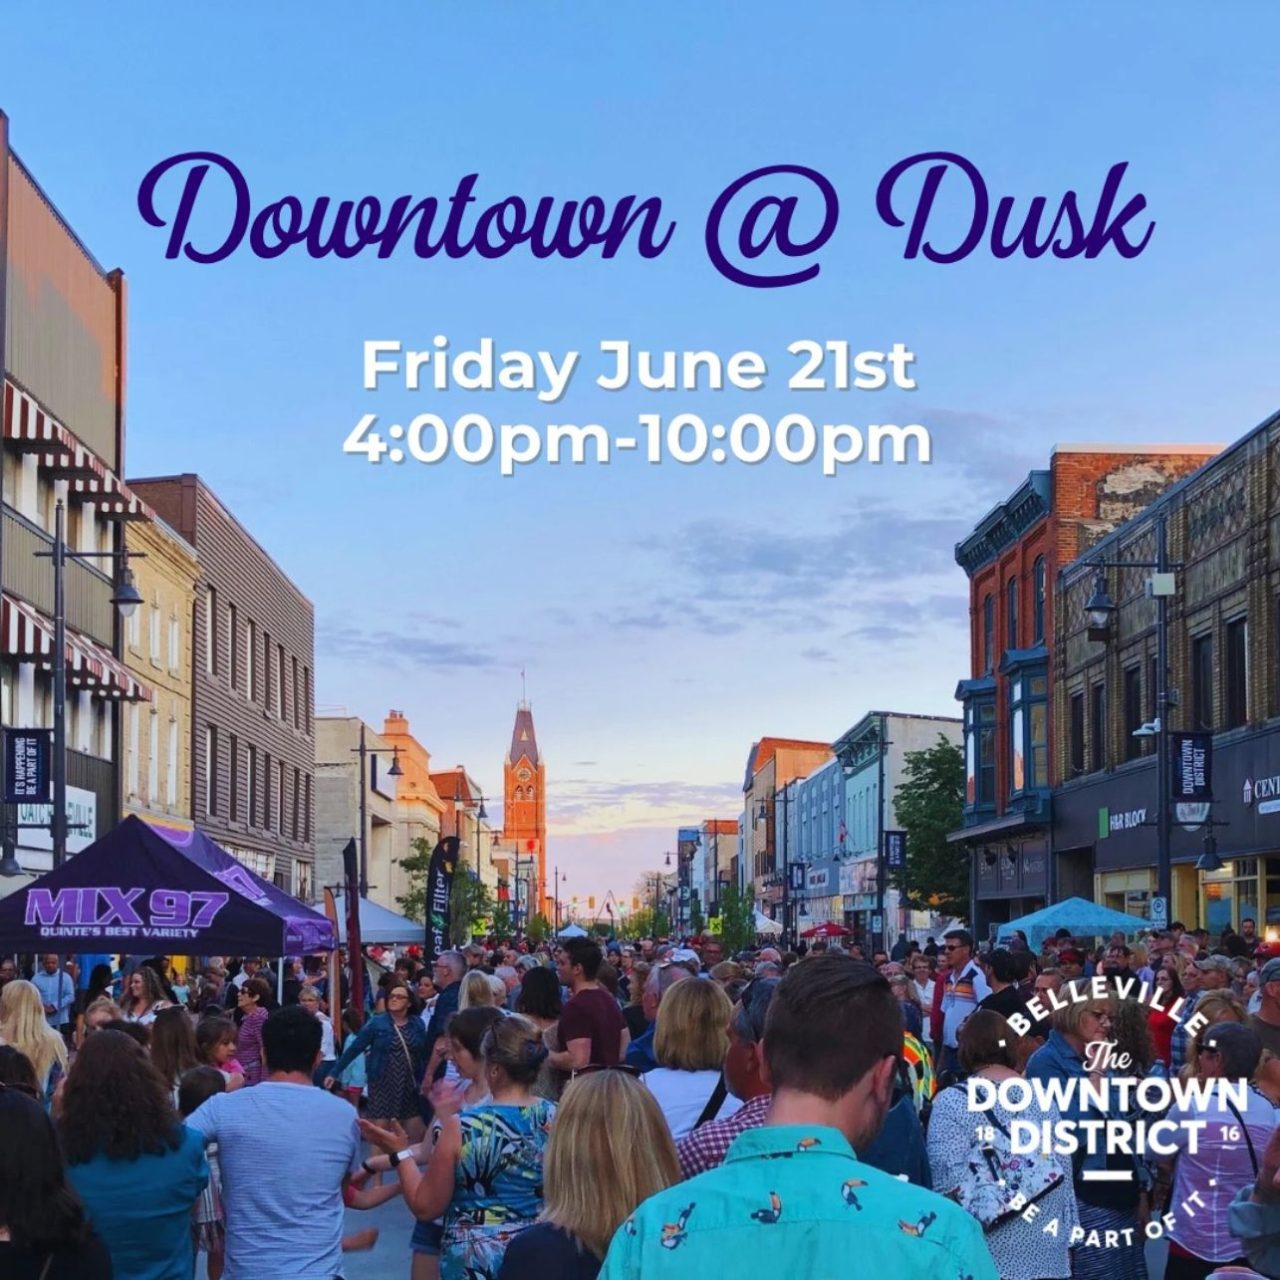 Event poster with photo of street promenade in Belleville